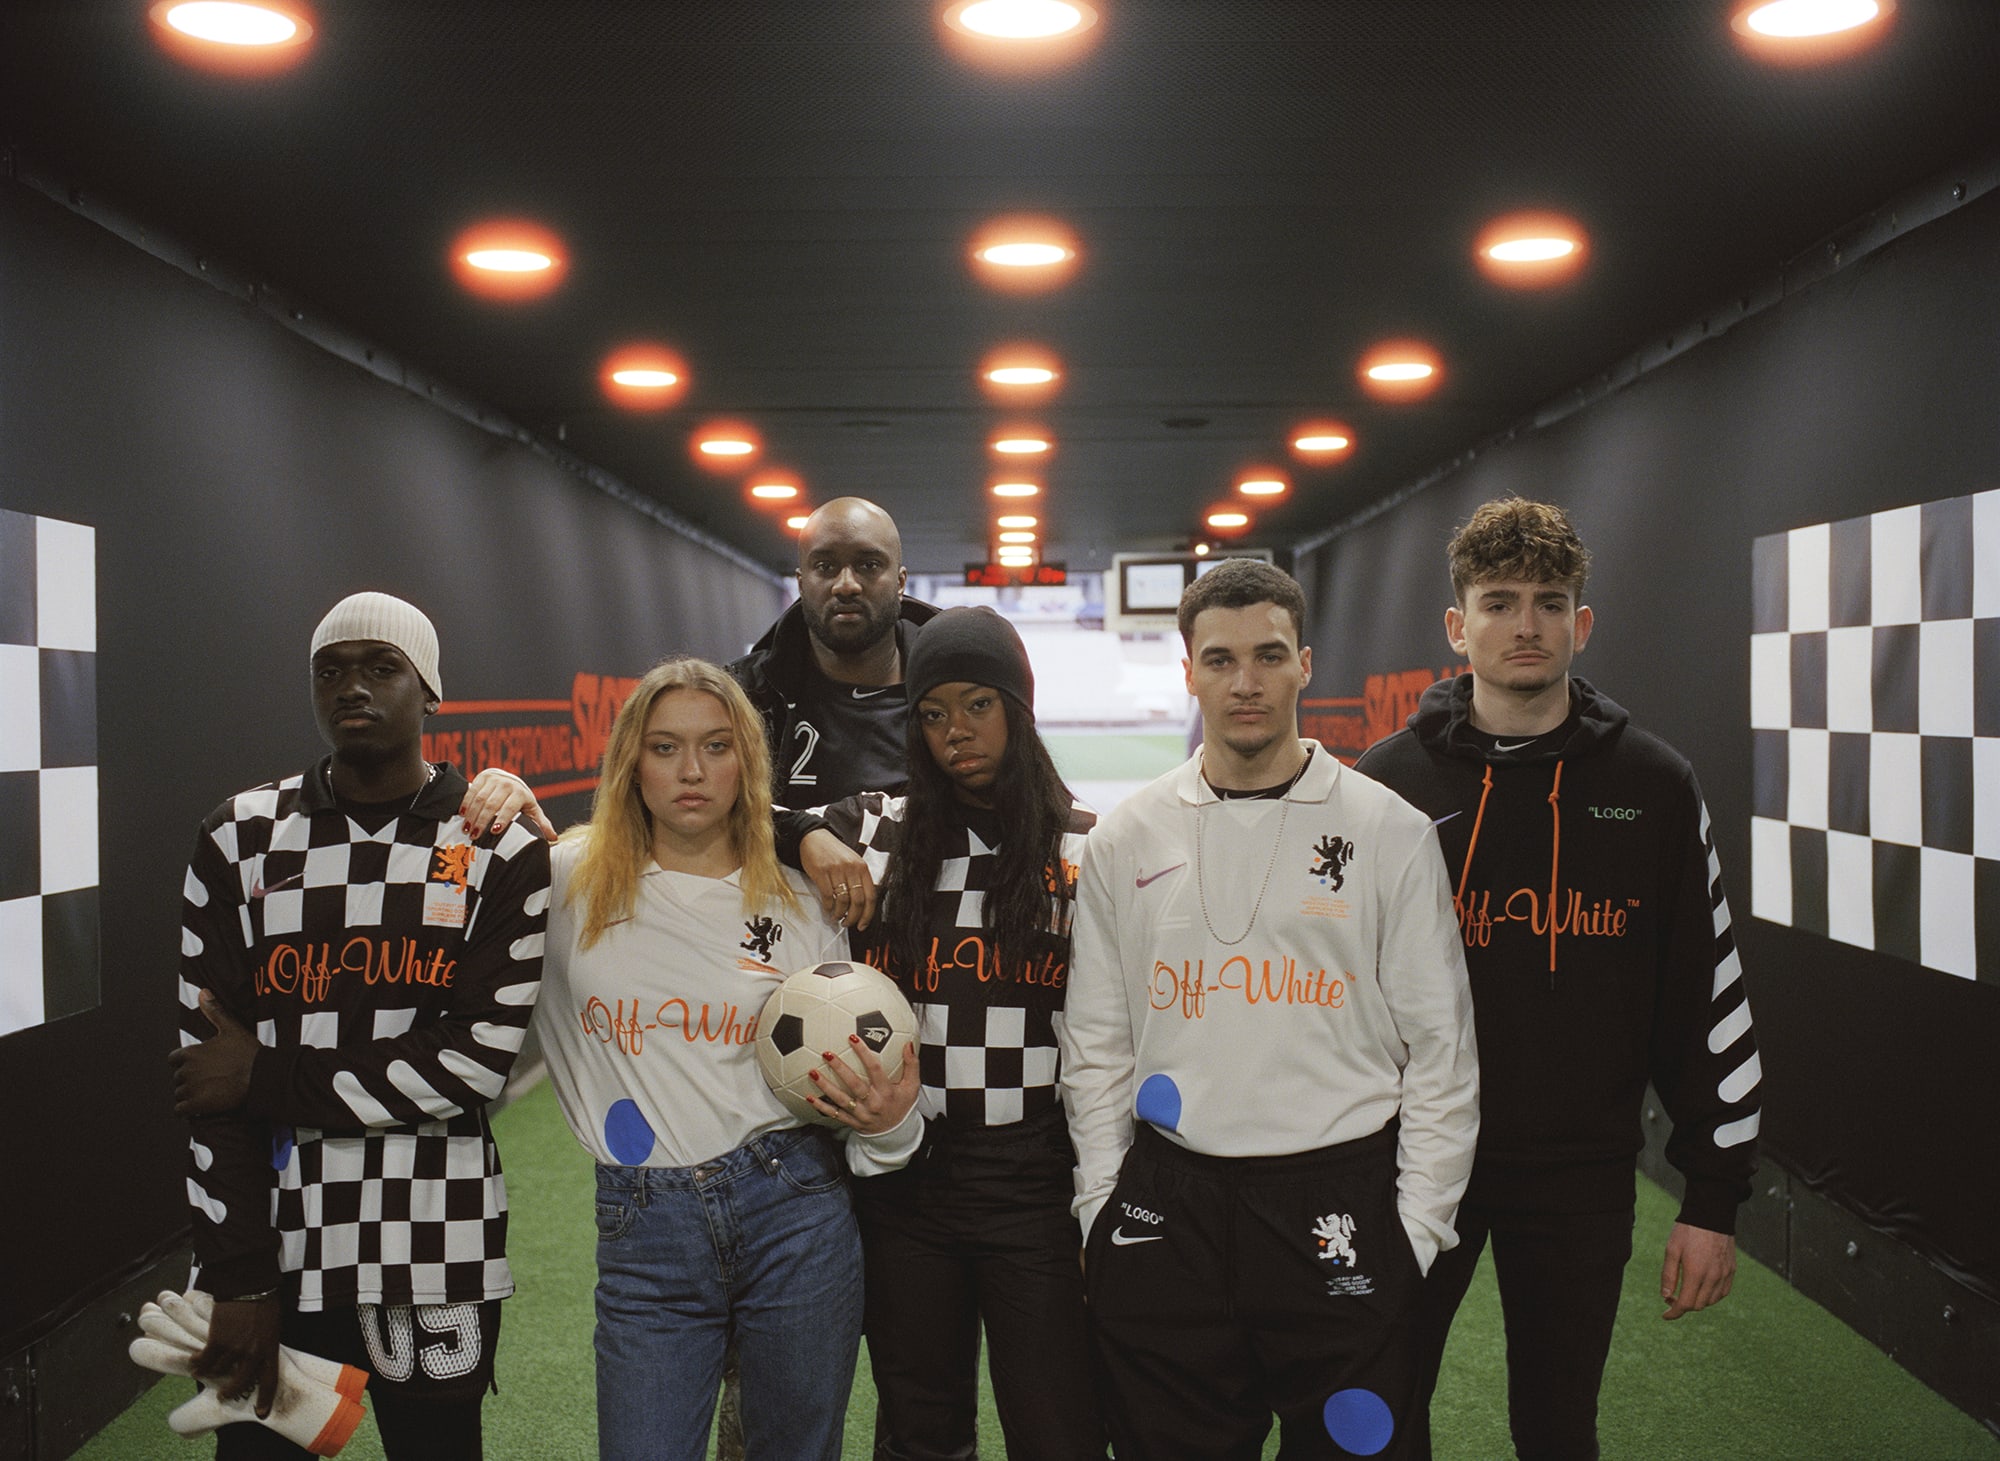 Virgil Abloh and Kim Jones Join Forces With Nike to Reinterpret the Classic Soccer Kit